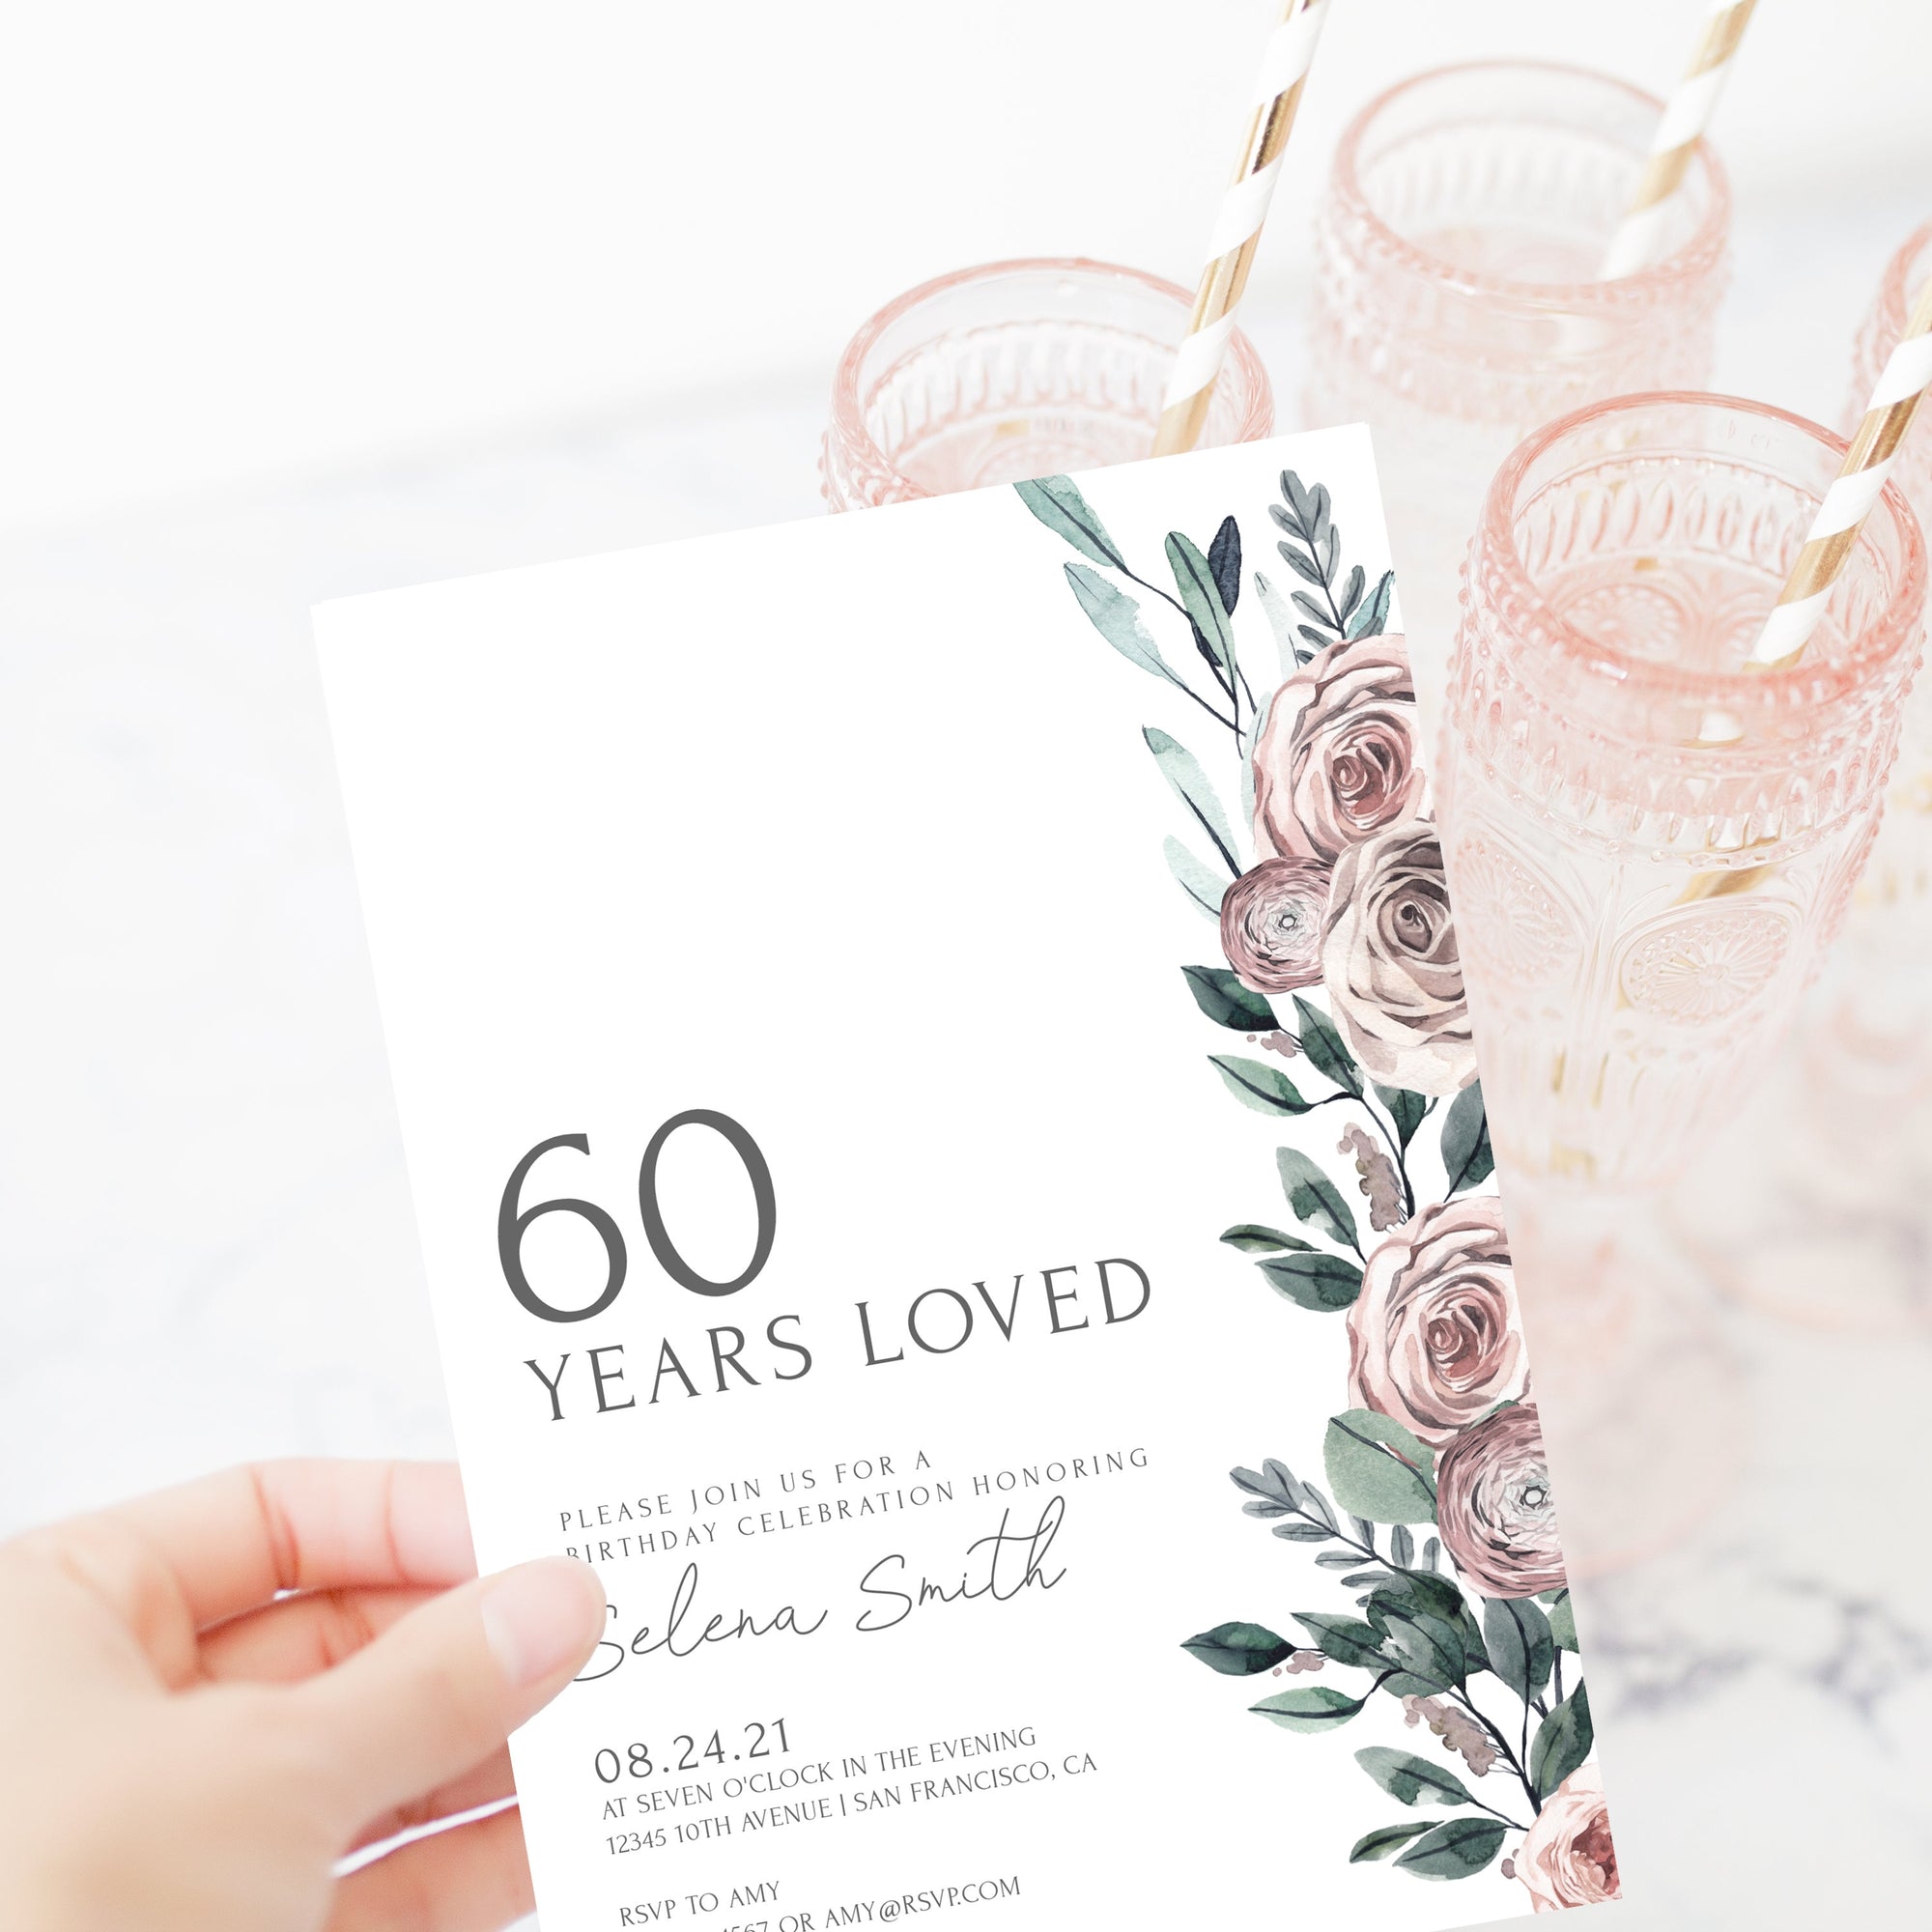 60th Birthday Invite Template, Boho Rose 60th Birthday Invitation For Women, 60 Years Loved Birthday Party Printable, INSTANT DOWNLOAD BR100